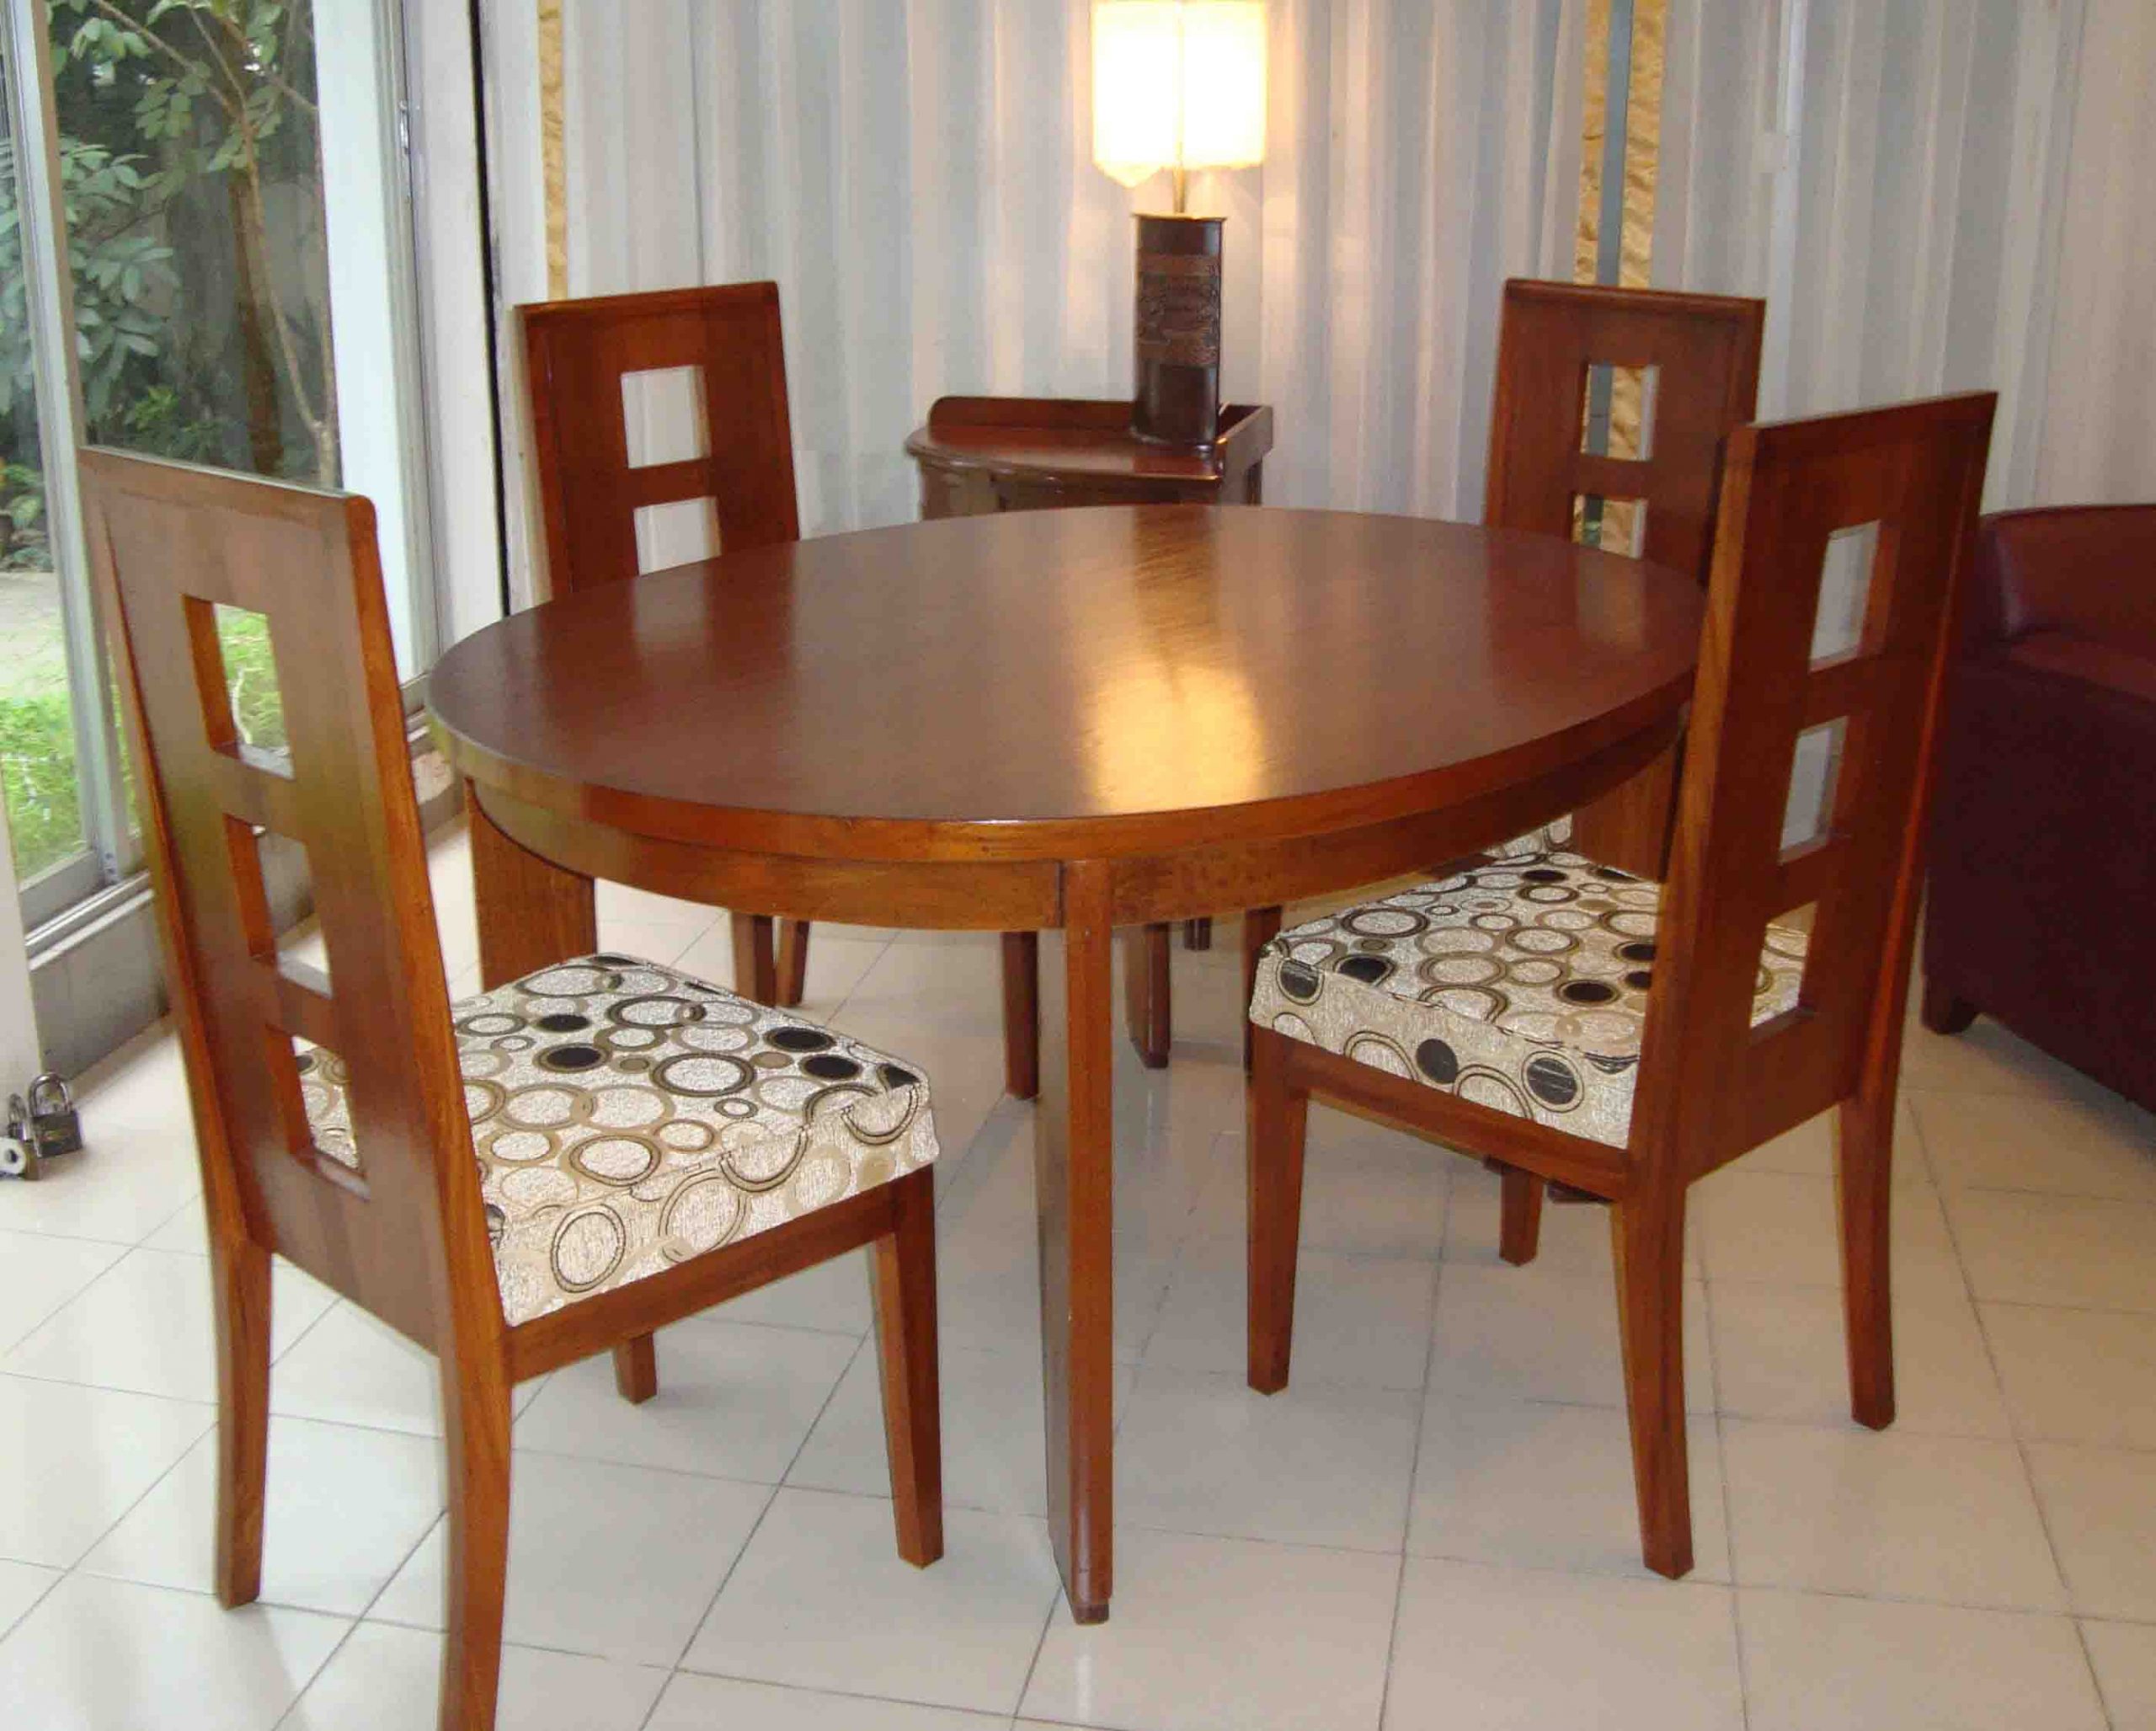 Nza Dining Table With 4 Chairs Made Of Solid Wood Clickbd within dimensions 2796 X 2244